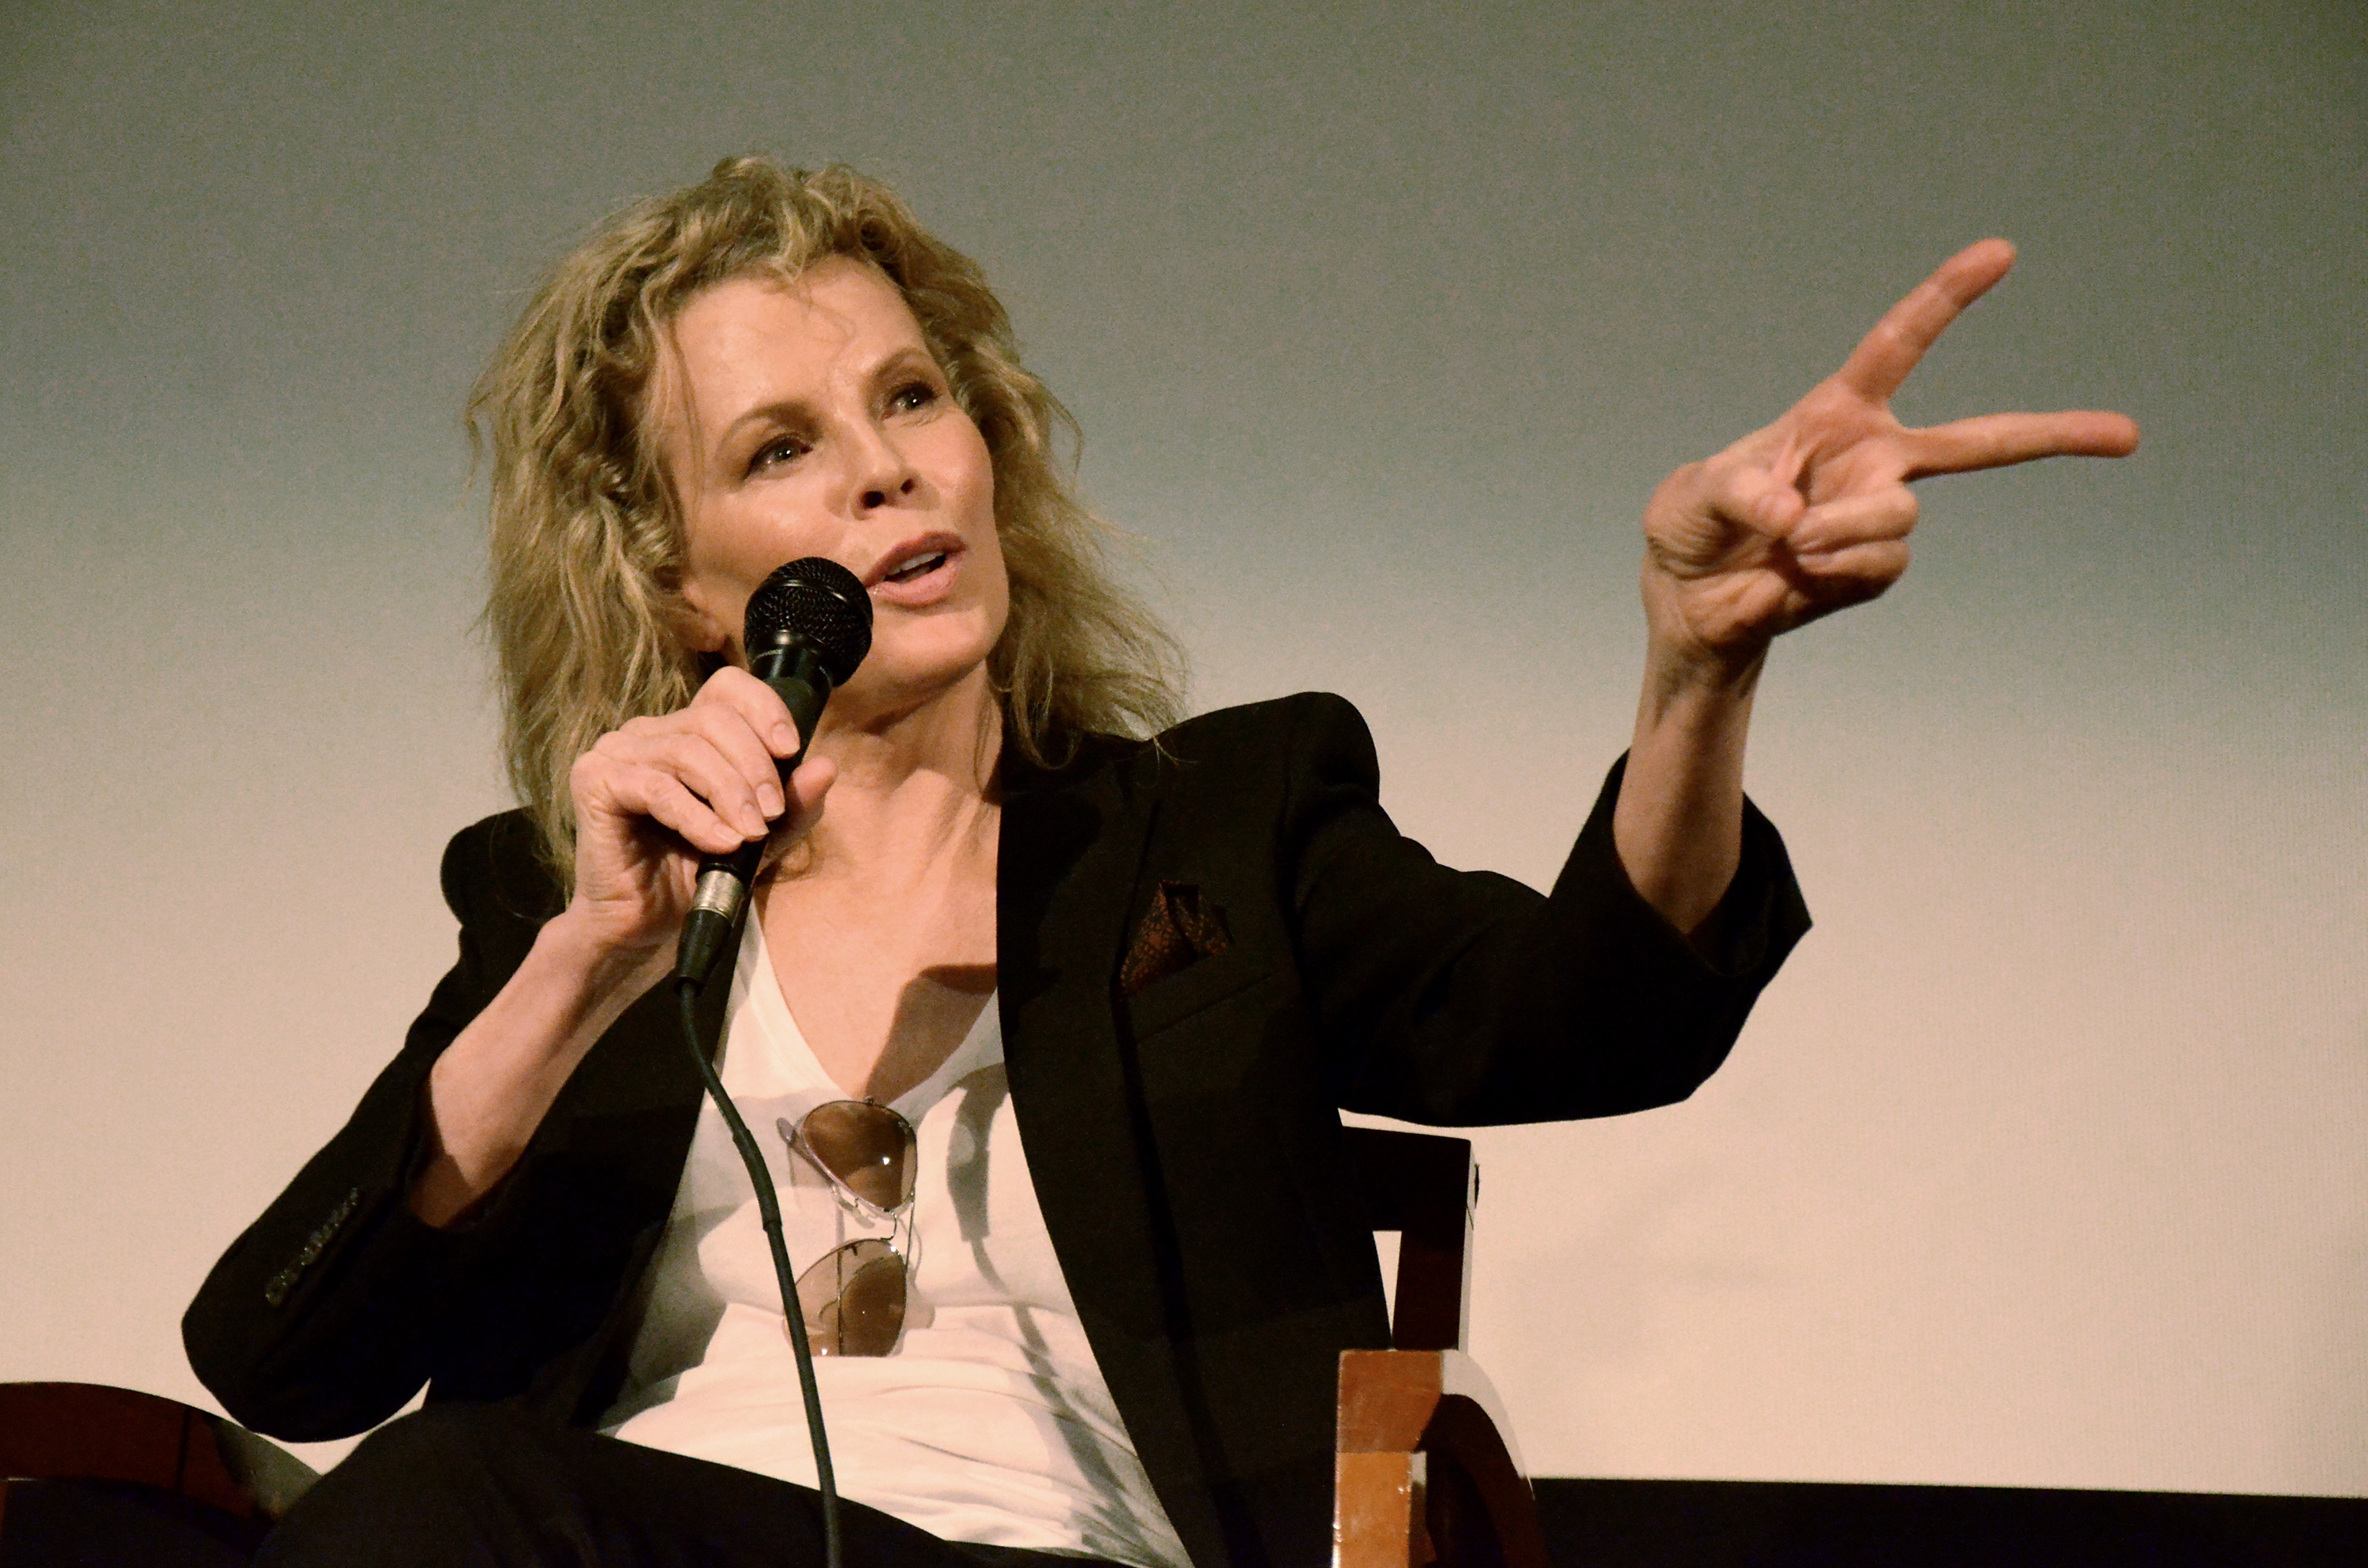 Kim Basinger at the Q&A segment of a screening of "The 11th Hour" in Santa Monica, 2015 | Source: Getty Images